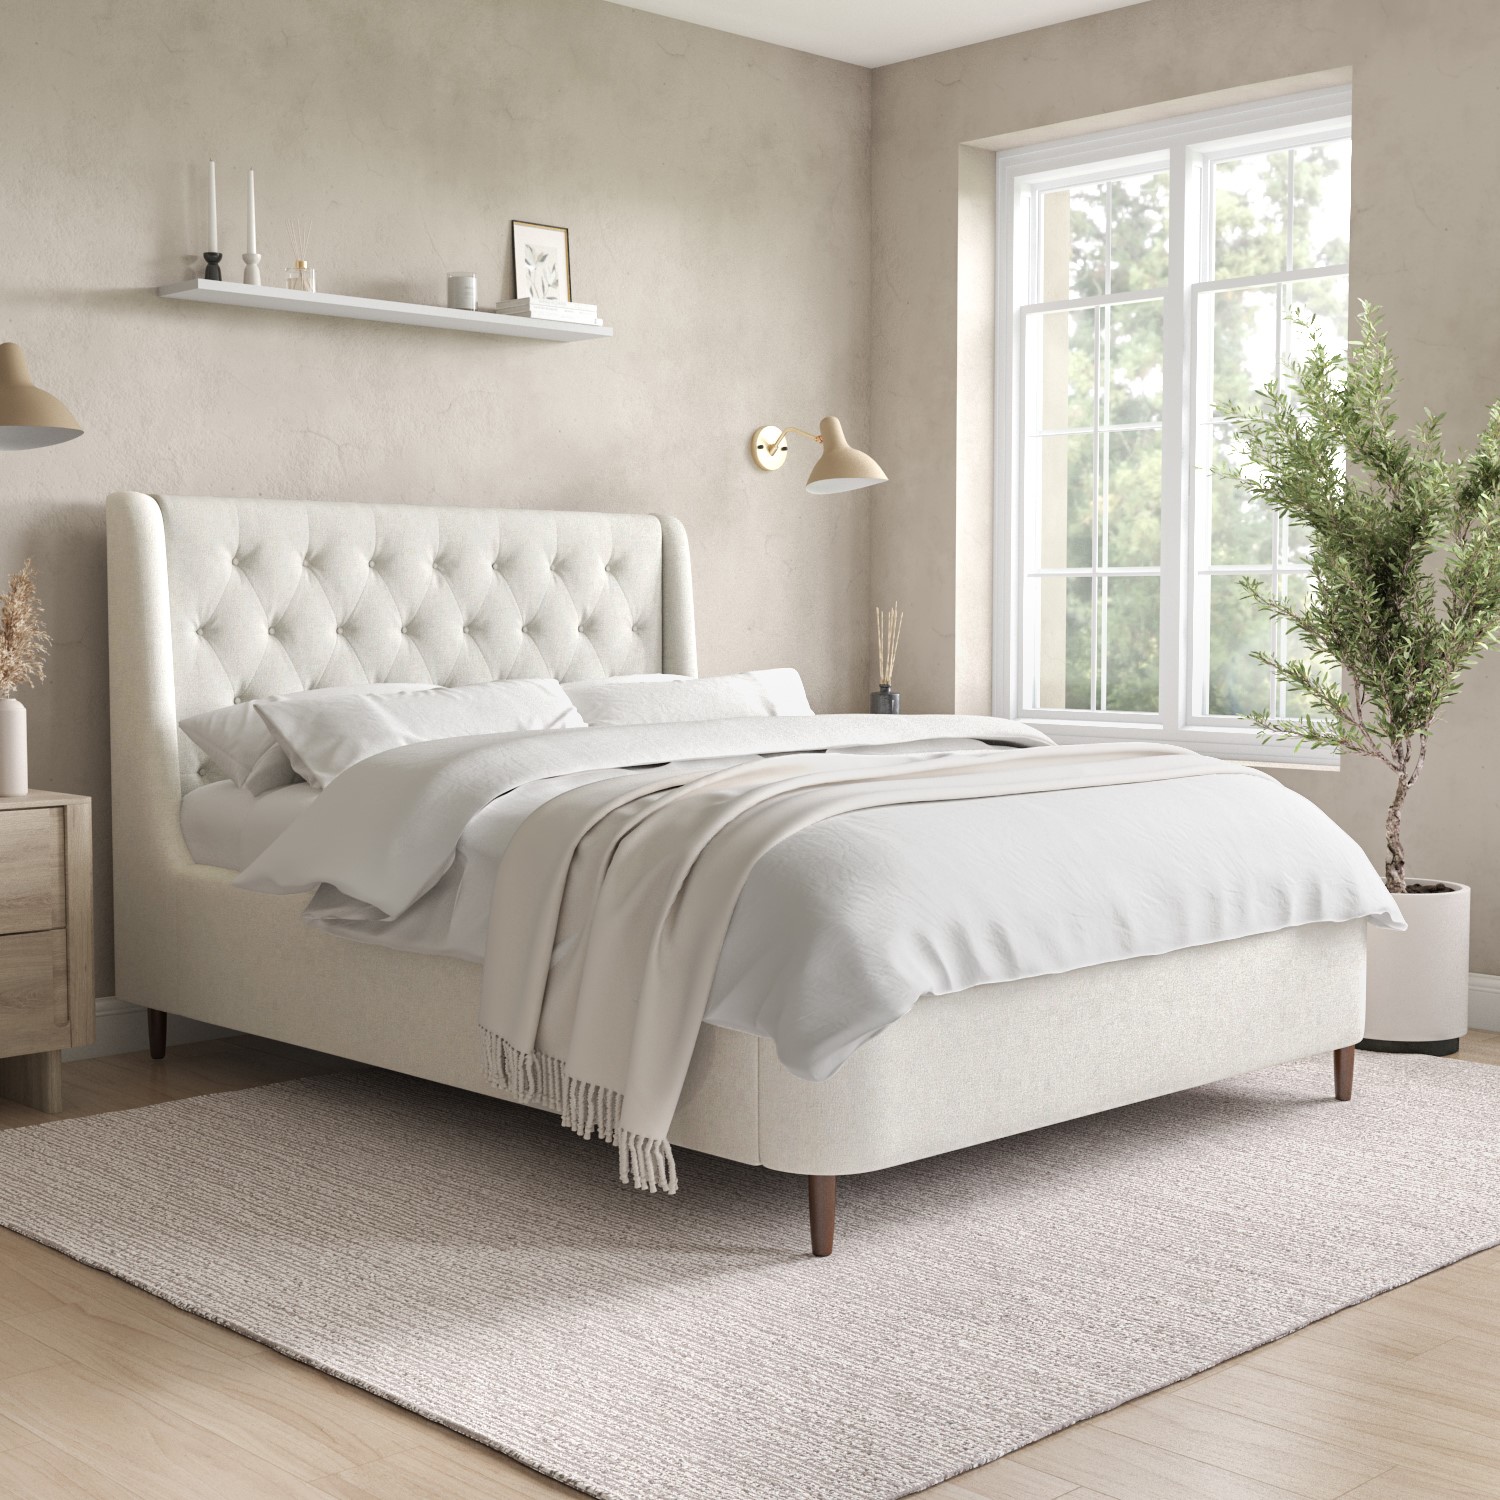 Photo of Cream fabric double ottoman bed with legs - amara